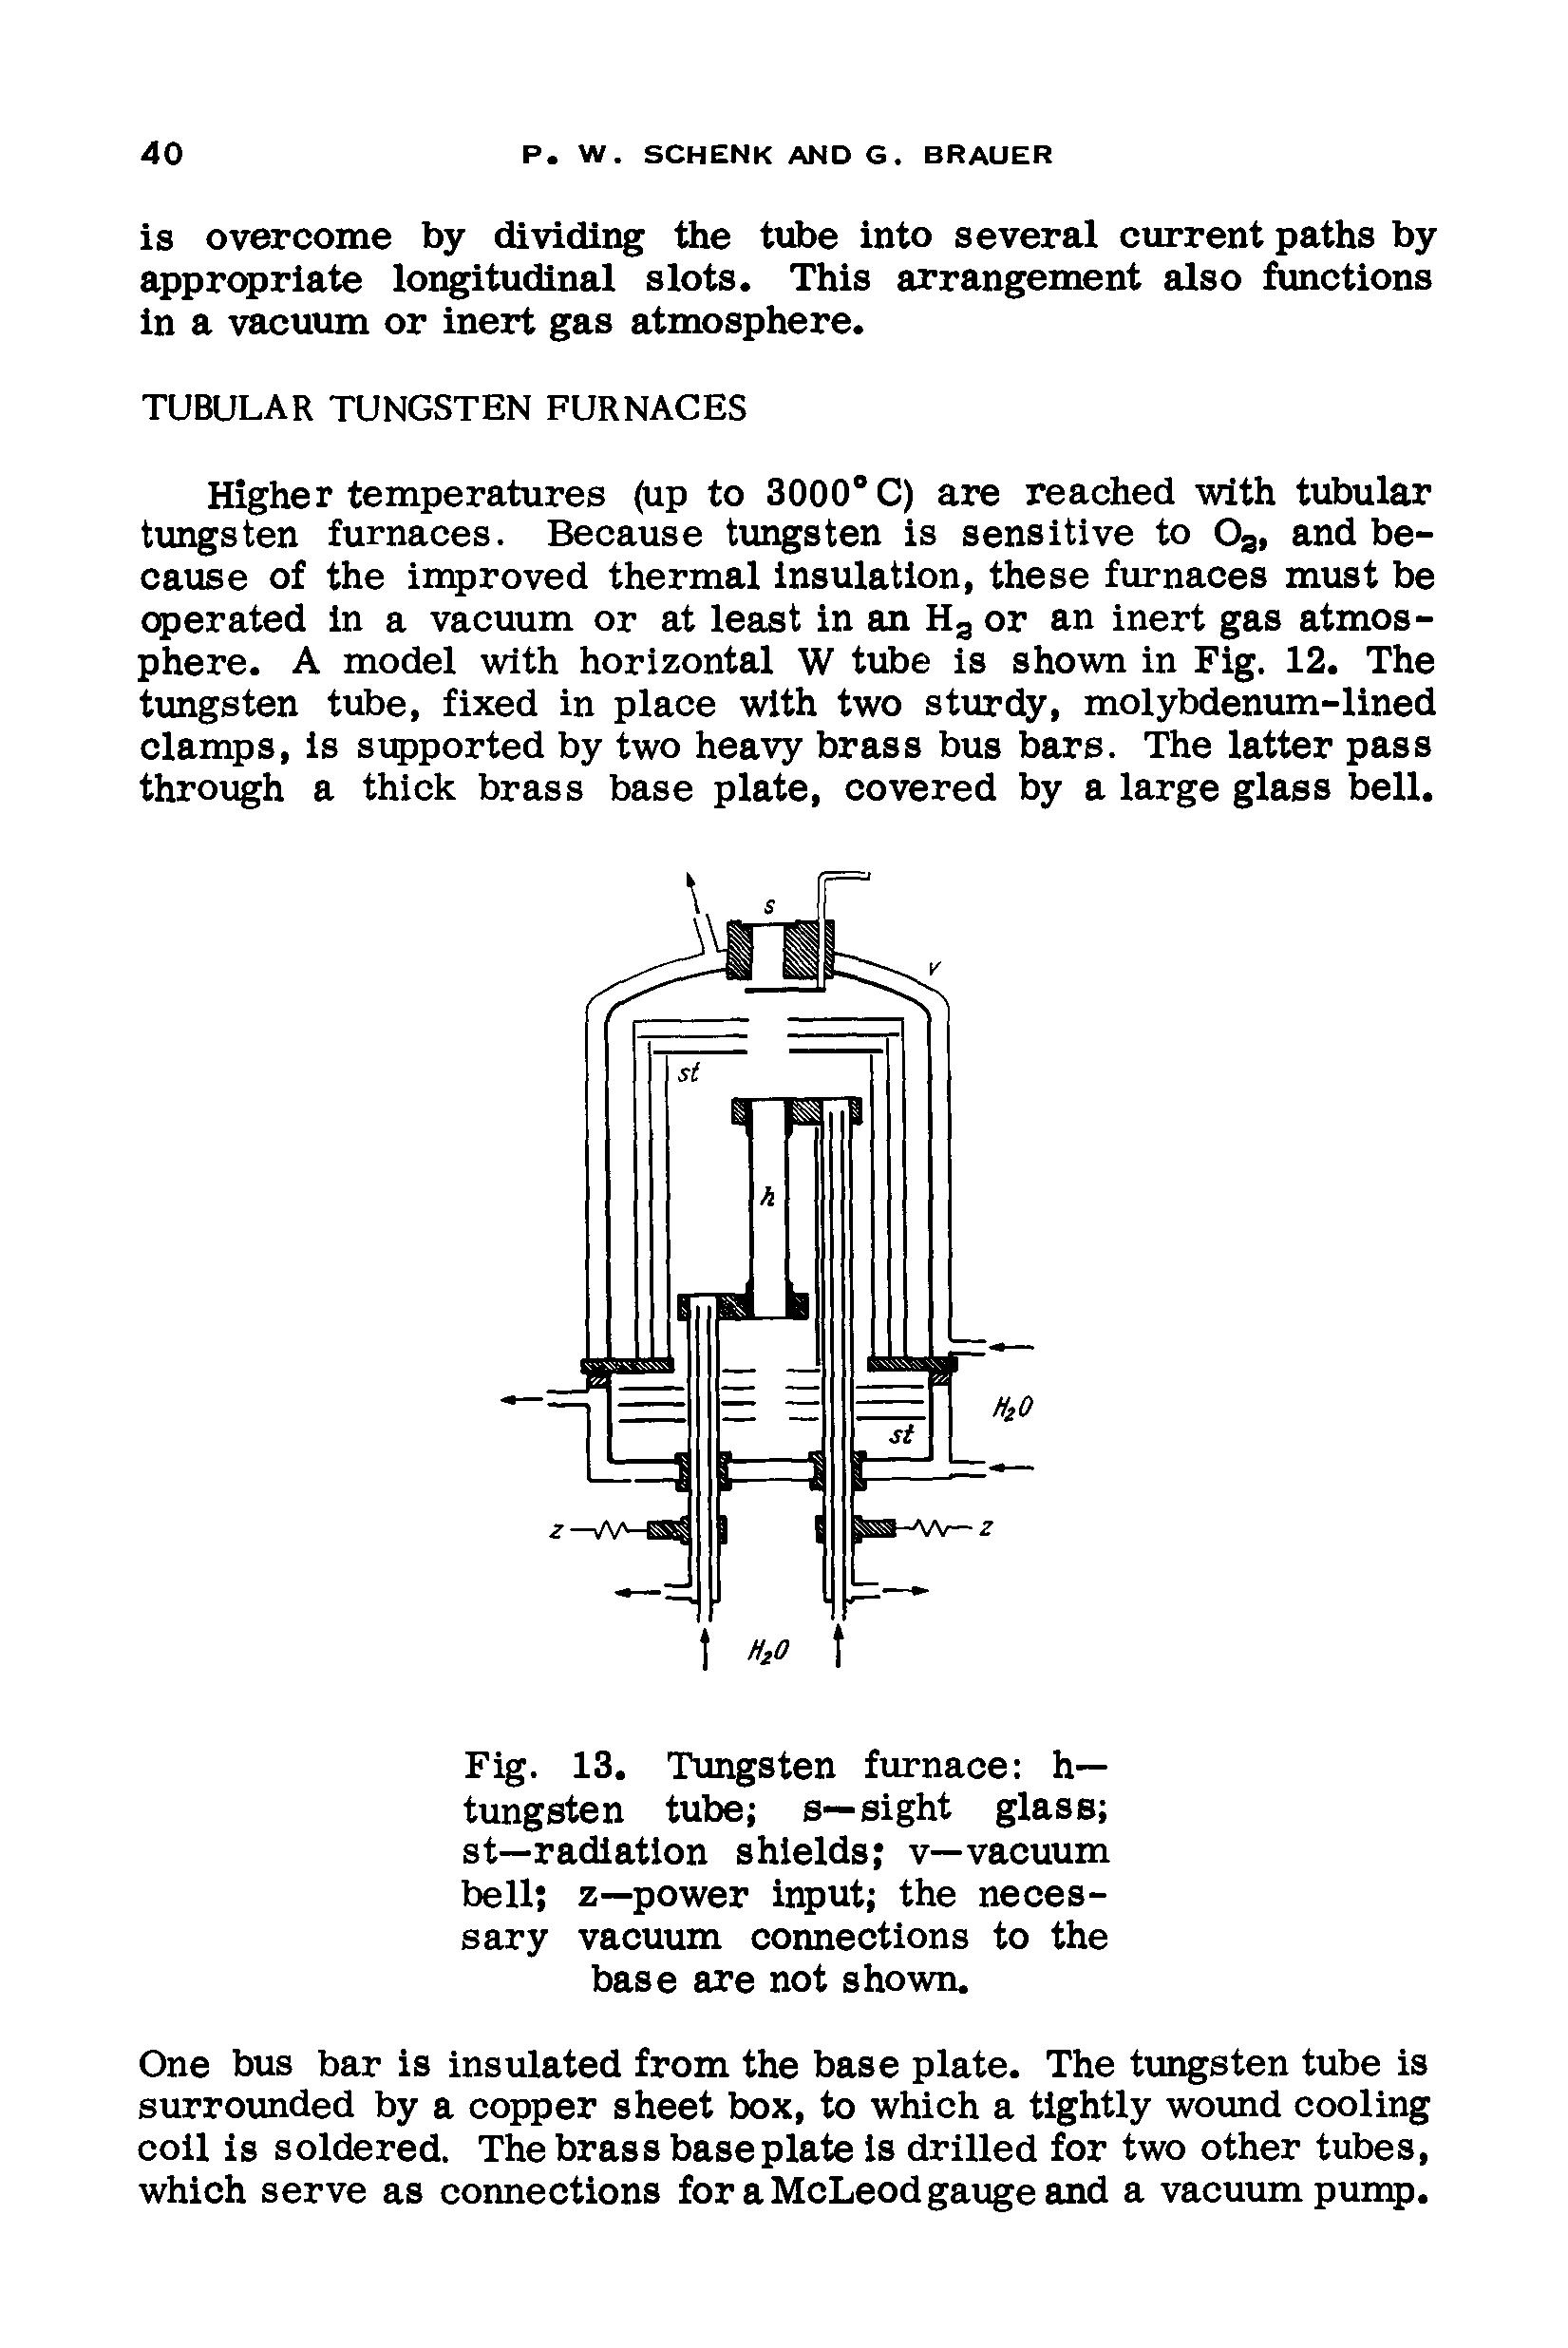 Fig. 13. Tungsten furnace h— tungsten tube s—sight glass st—radiation shields v—vacuum bell z—power input the necessary vacuum connections to the base are not shown.